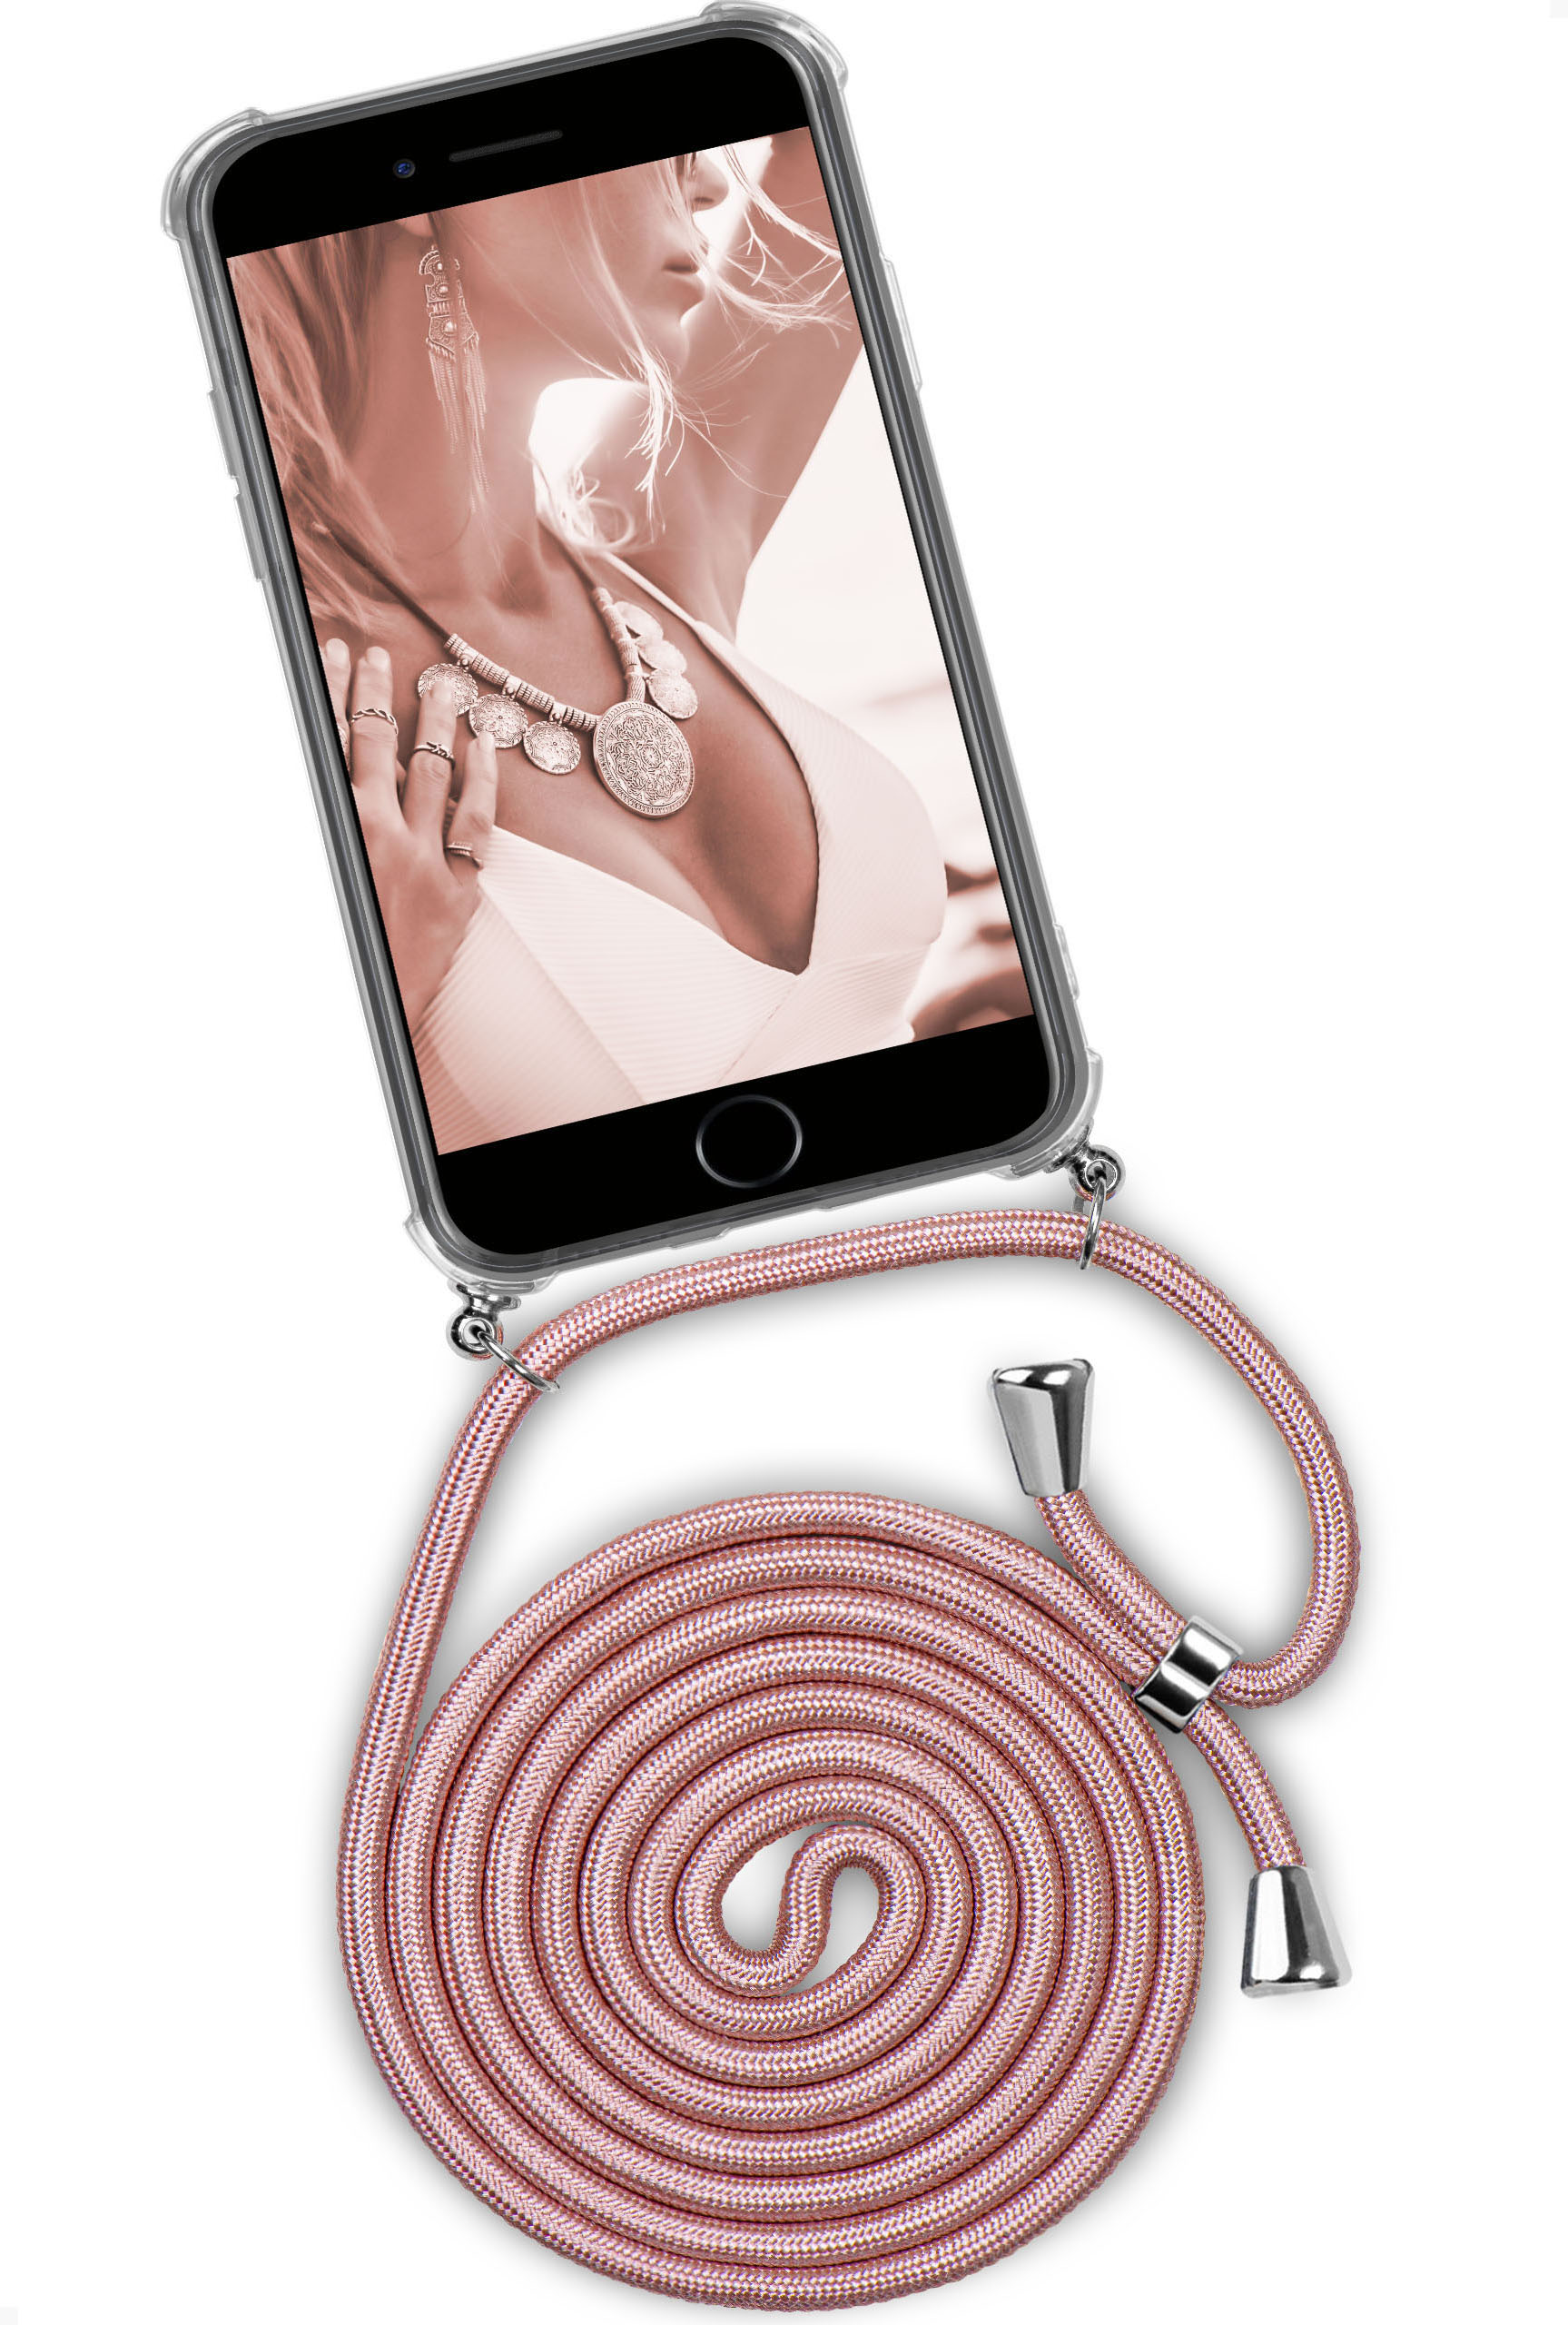 / 8, iPhone Blush Apple, 7 ONEFLOW (Silber) iPhone Backcover, Case, Shiny Twist